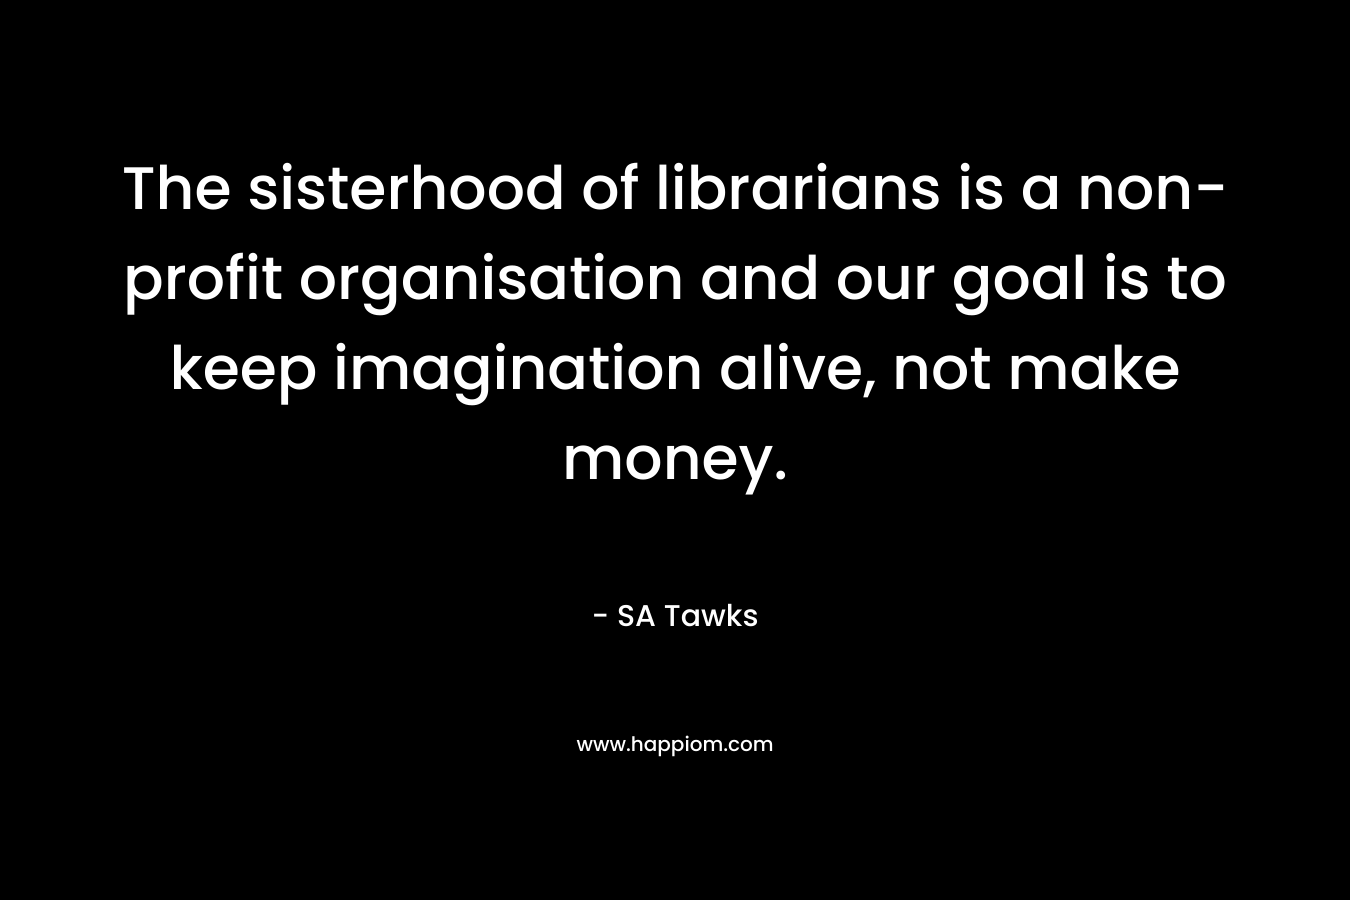 The sisterhood of librarians is a non-profit organisation and our goal is to keep imagination alive, not make money. – SA Tawks